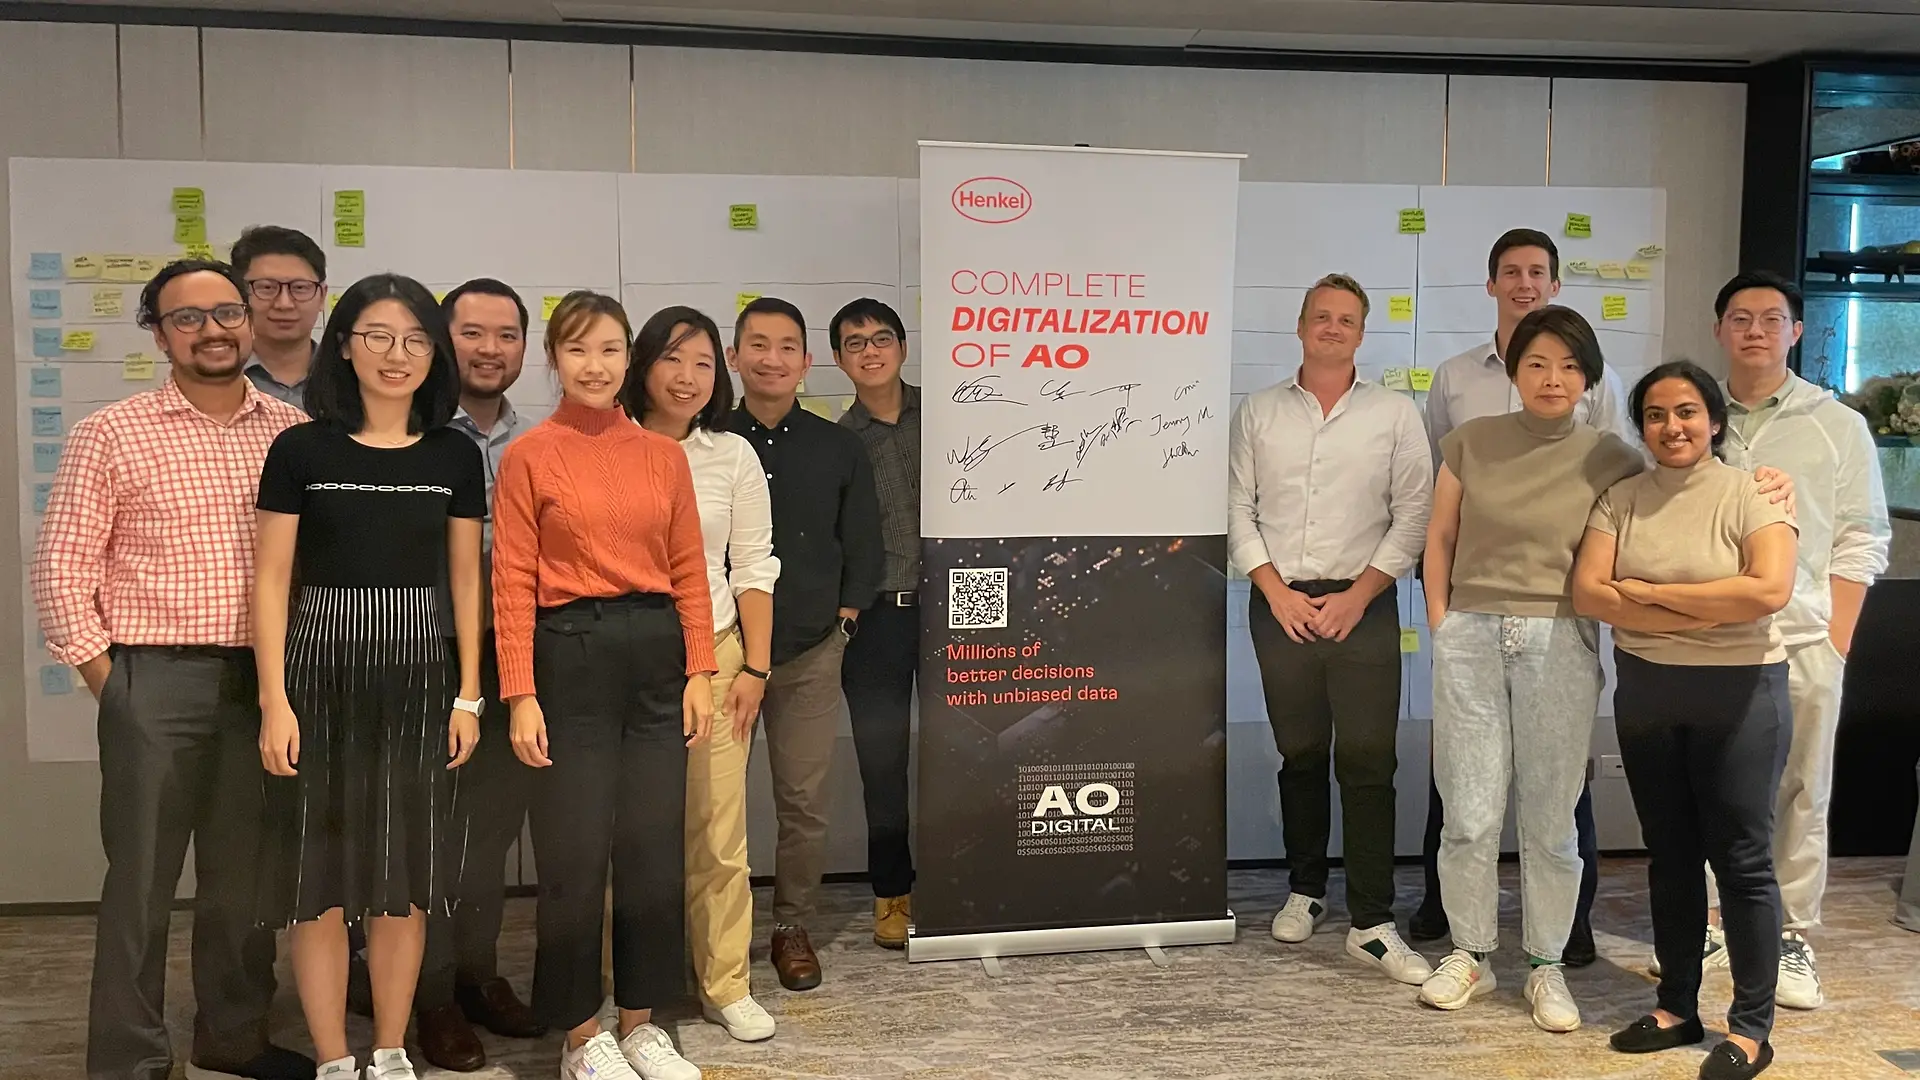 Nick and his team stand together in a meeting room posing next to a roll-up that says “Complete Digitalization of AO”.